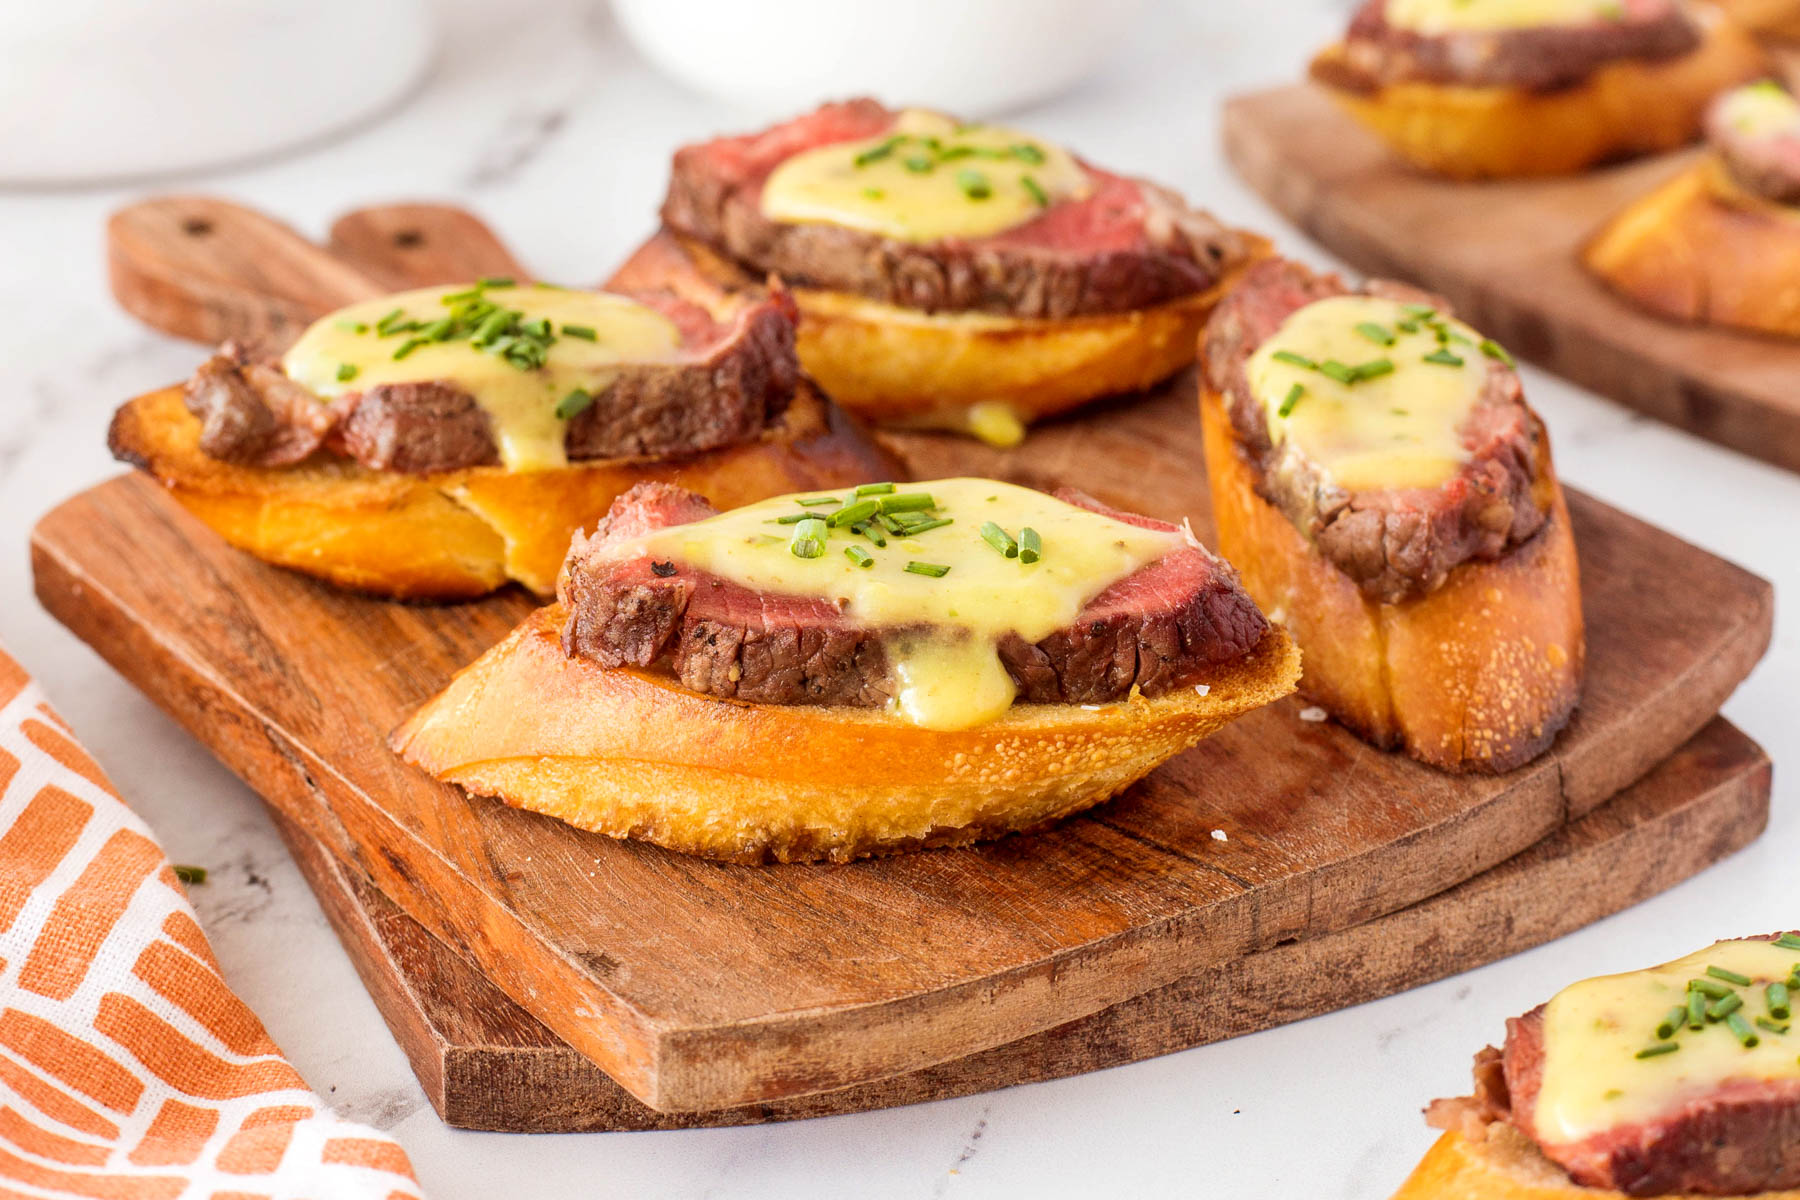 Grilled beef crostini with béarnaise sauce and chopped chives on a wooden serving board.